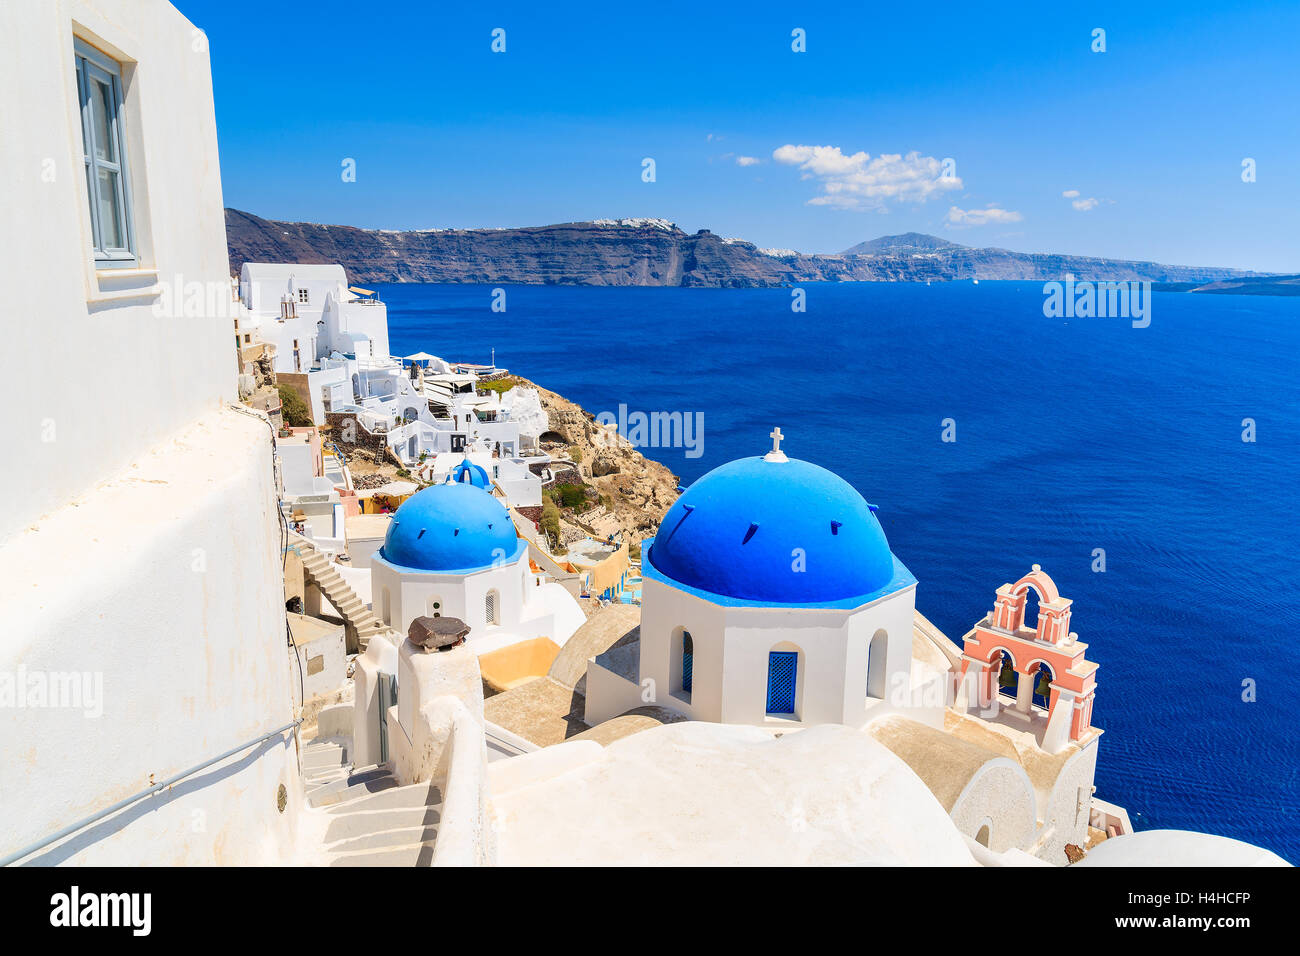 Famous blue dome of a church in Oia village and view of blue sea with caldera on Santorini island, Greece Stock Photo